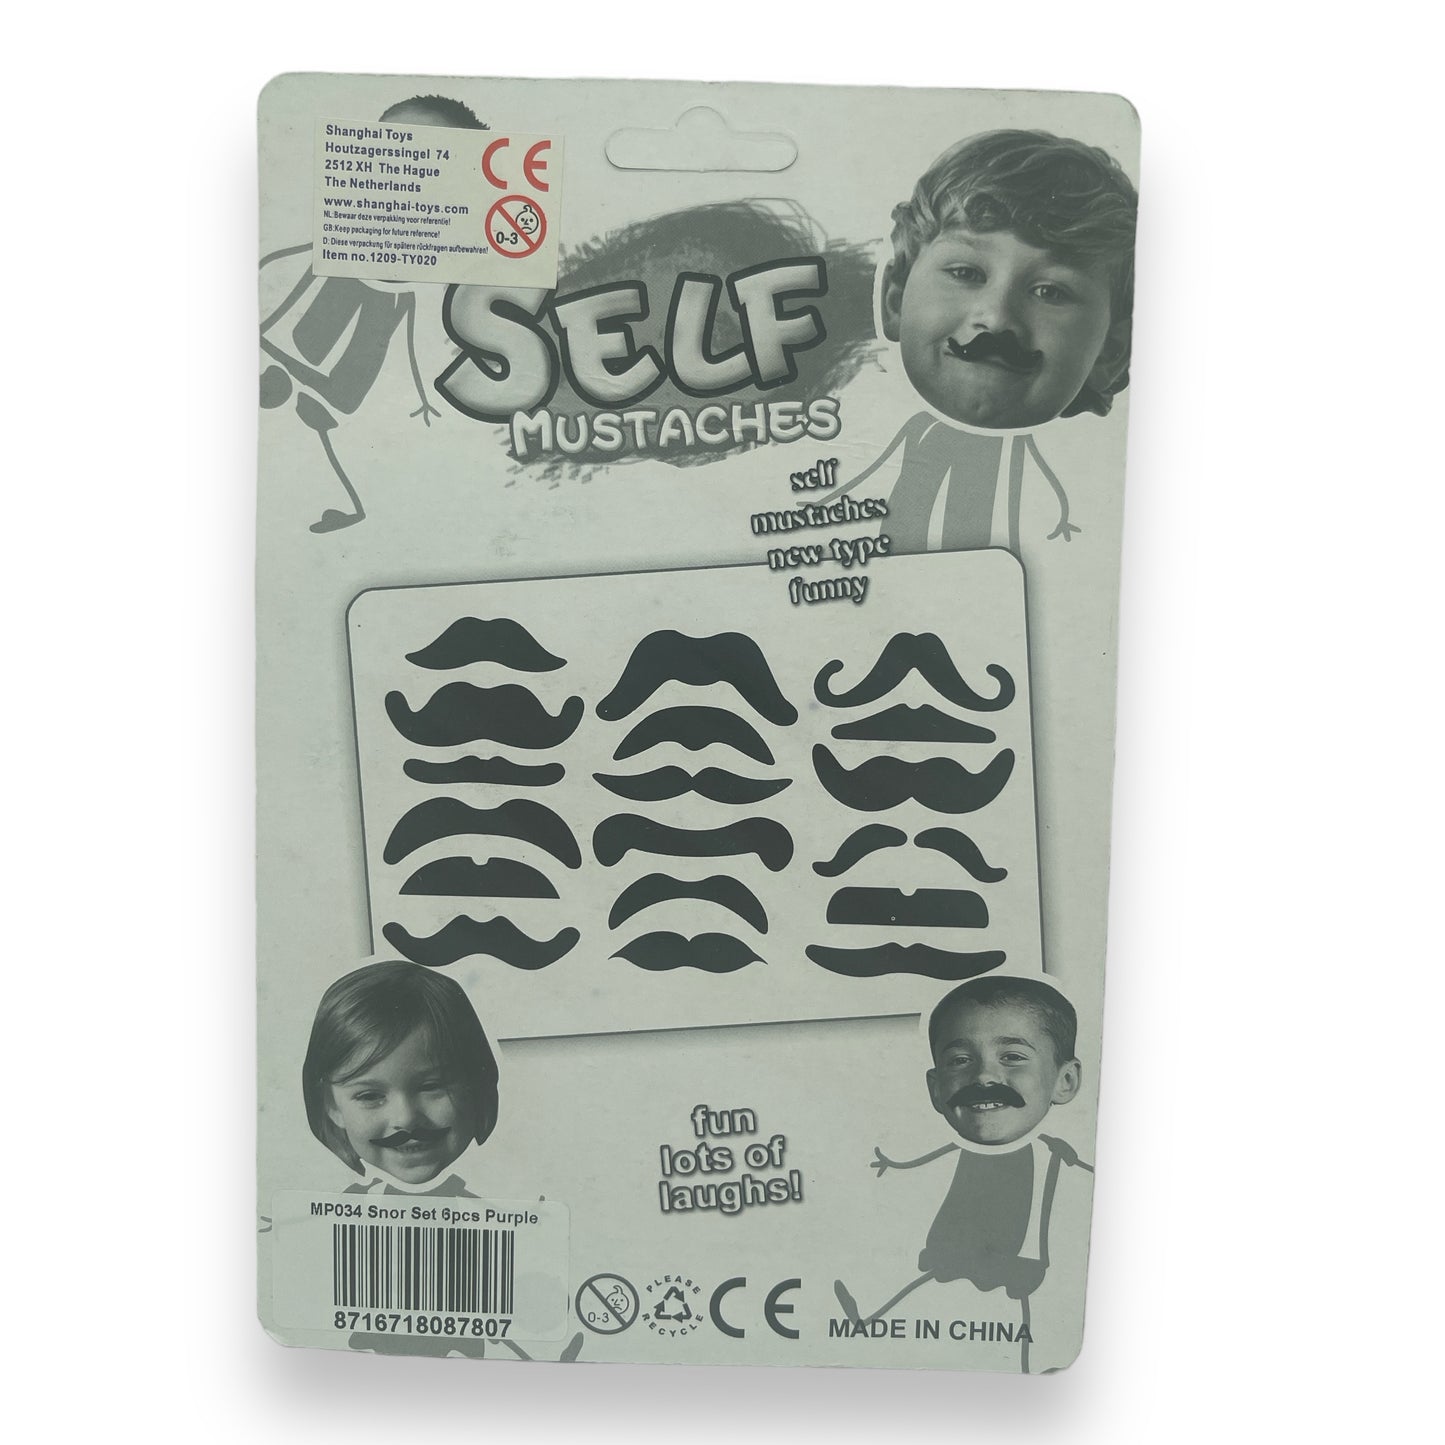 Kinky Pleasure - MP034 - Self Mustaches - 3 Models - 6 Pieces On Card